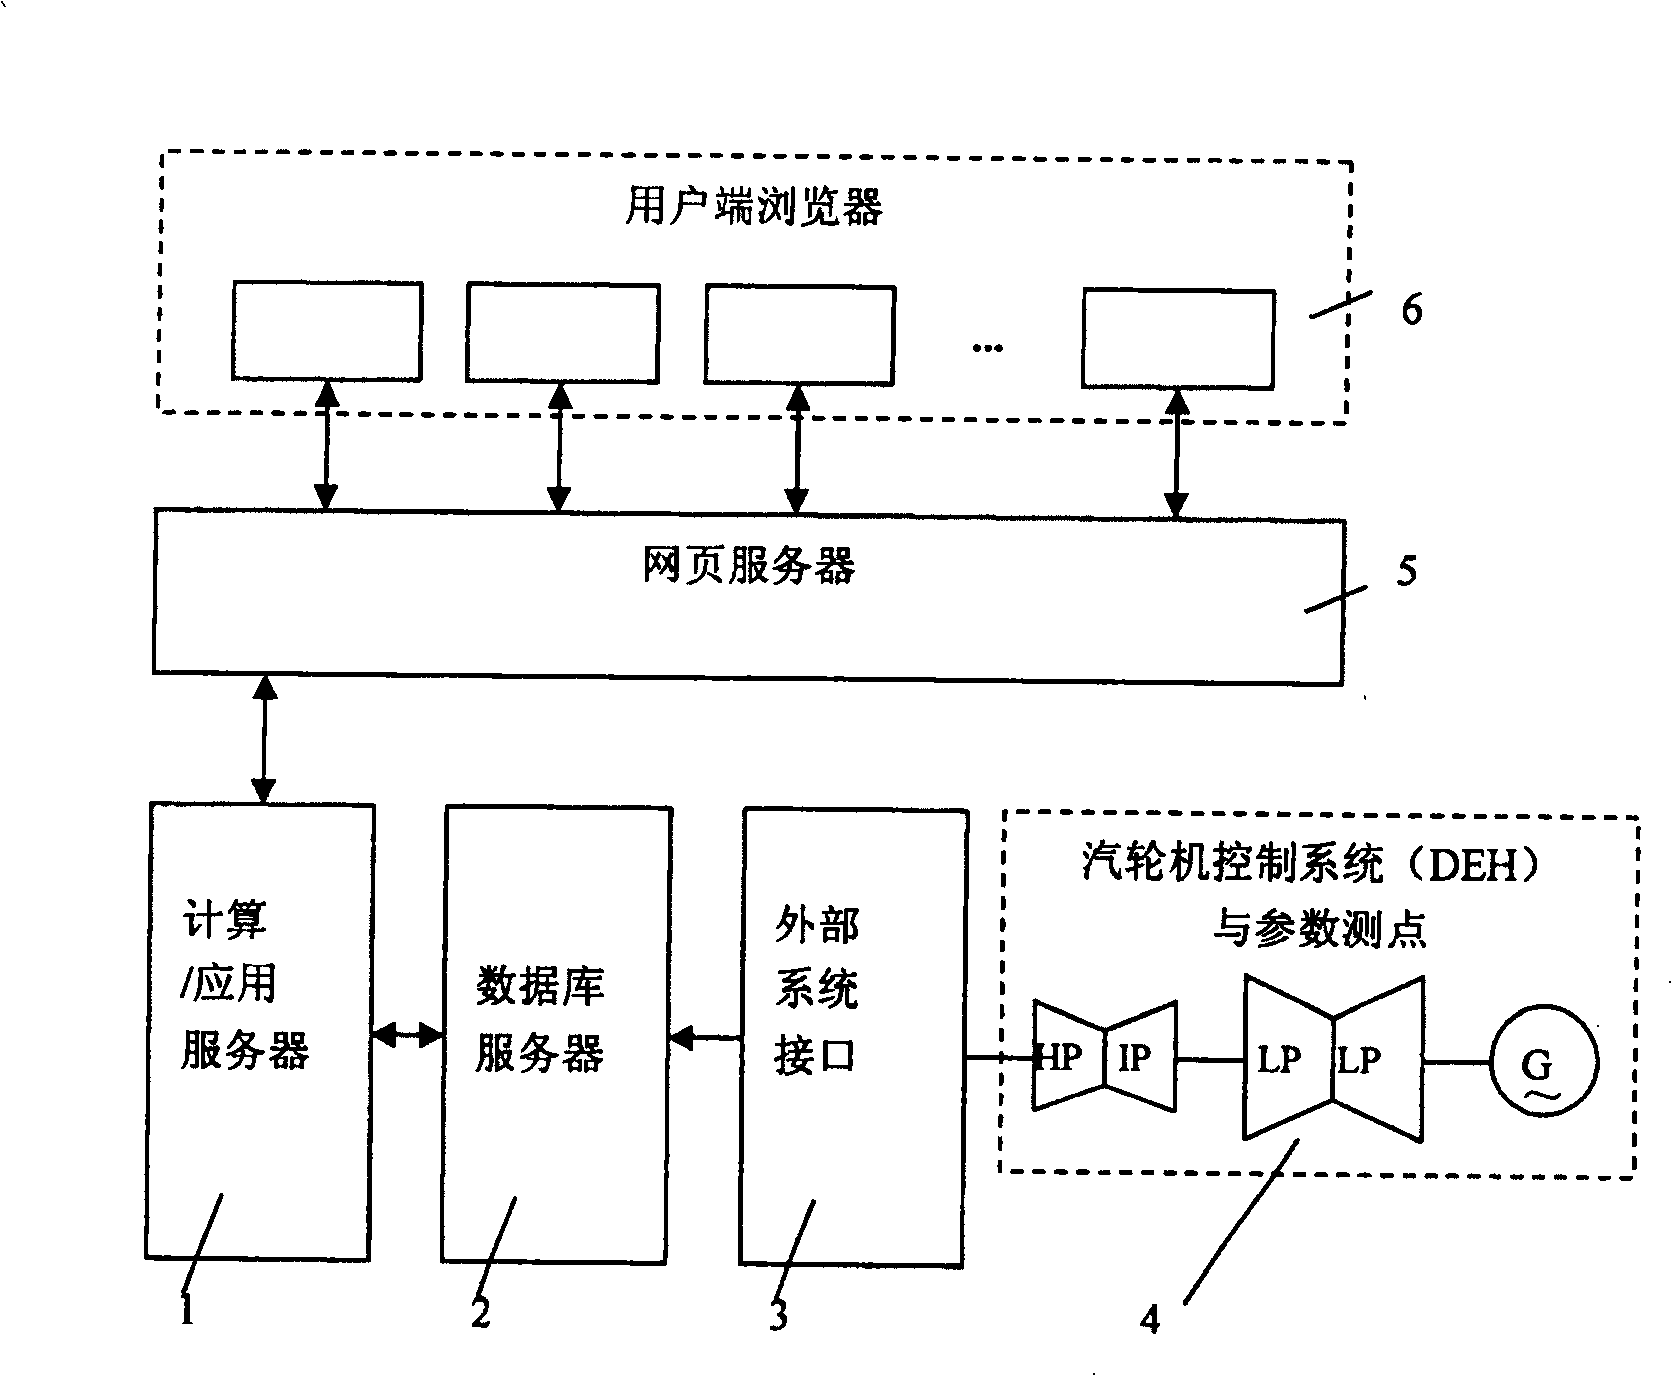 Method and system for on-line monitoring steam turbine roter low-cycle fatigue life consumption